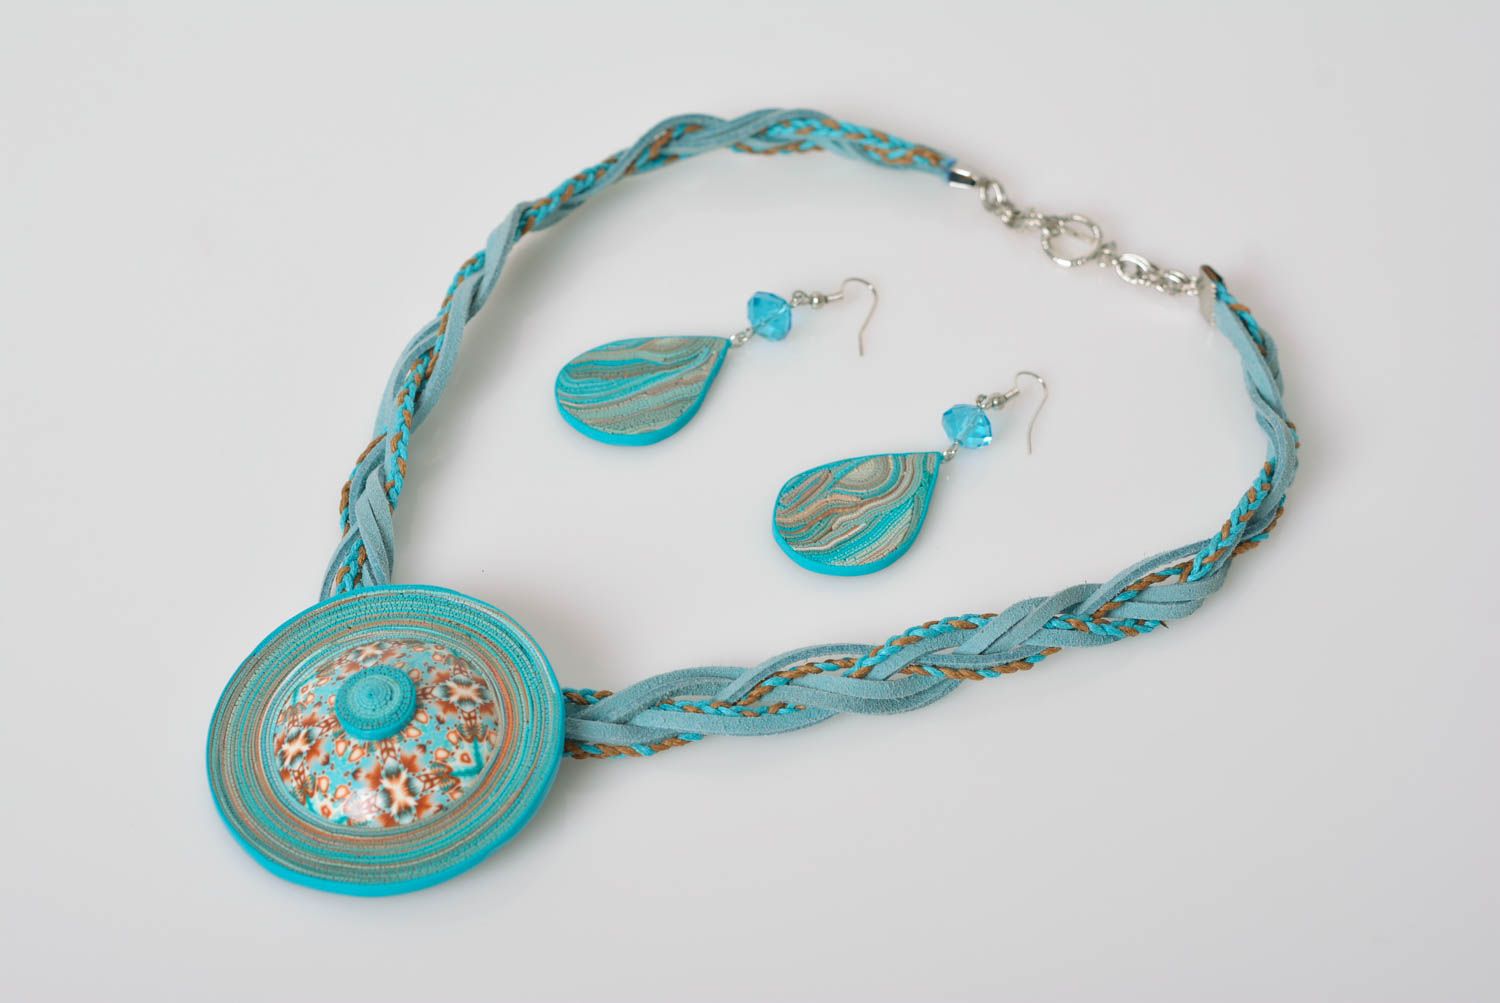 Set of handmade turquoise polymer clay jewelry 2 items necklace and earrings photo 1